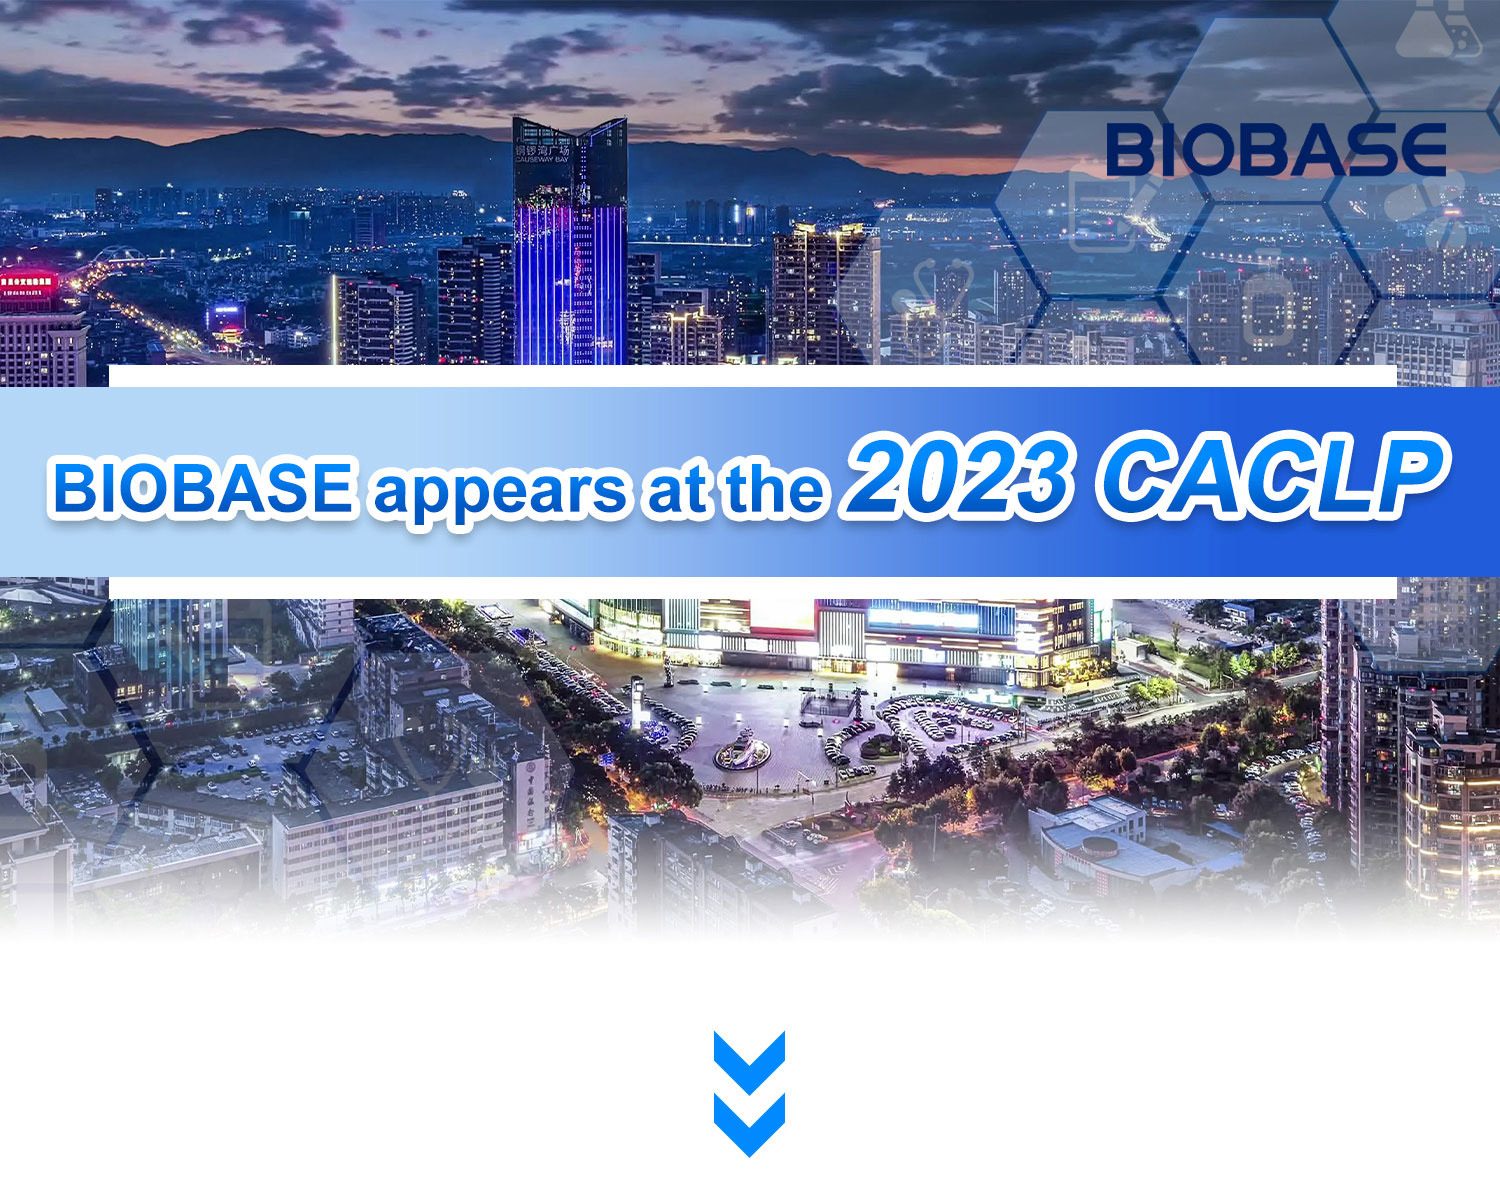 BIOBASE appears at the 2023 CACLP